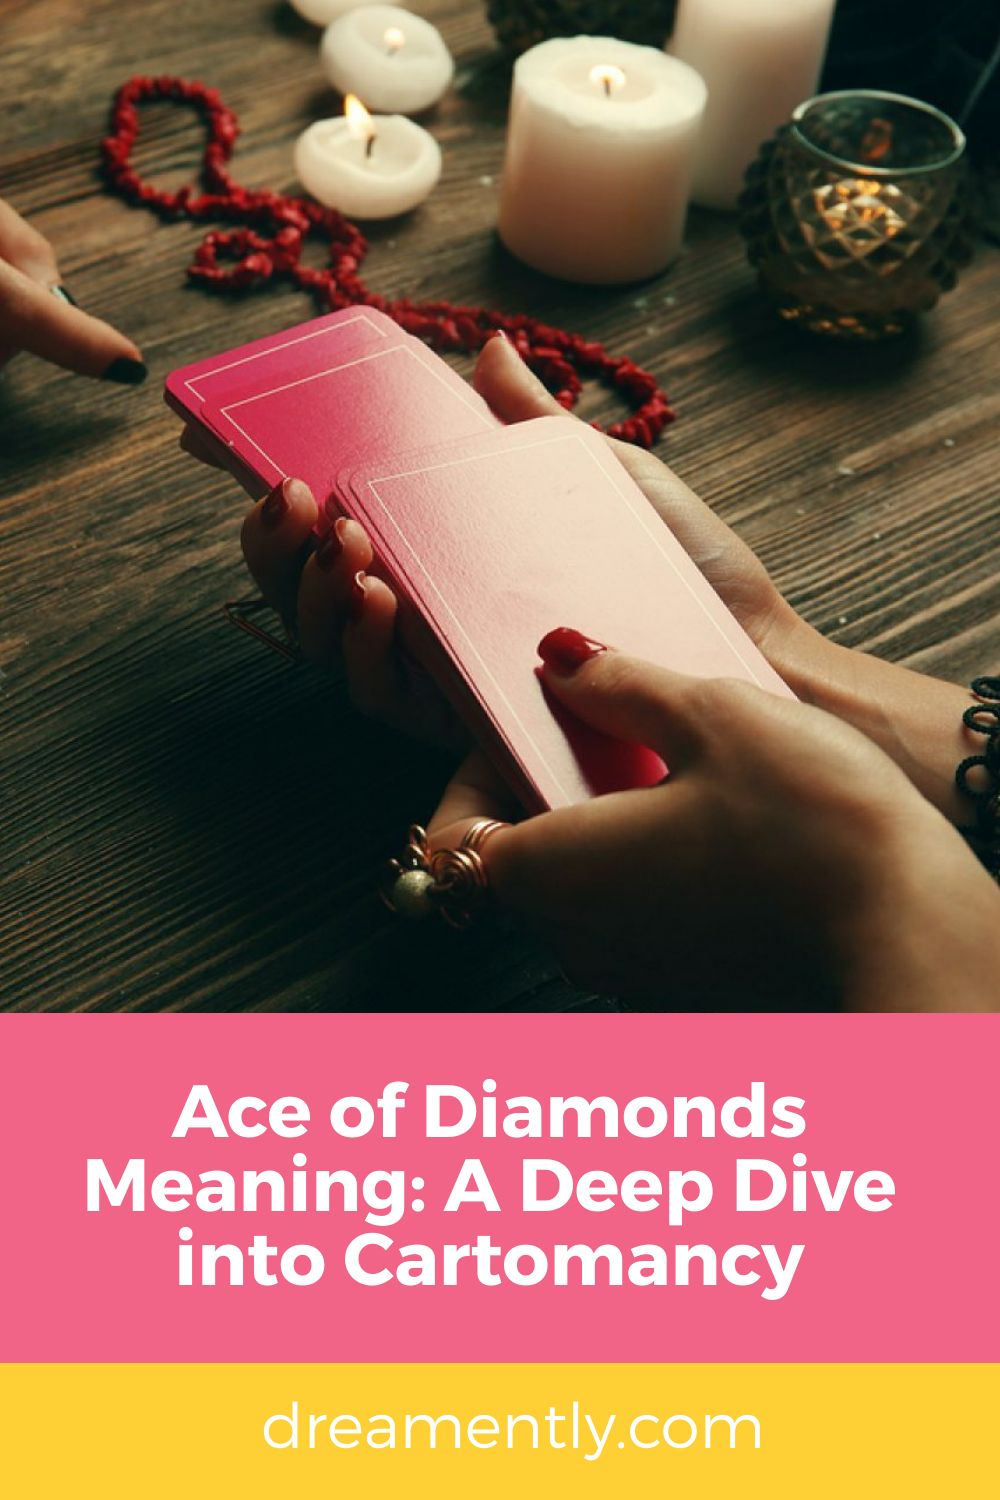 Ace of Diamonds Meaning A Deep Dive into Cartomancy